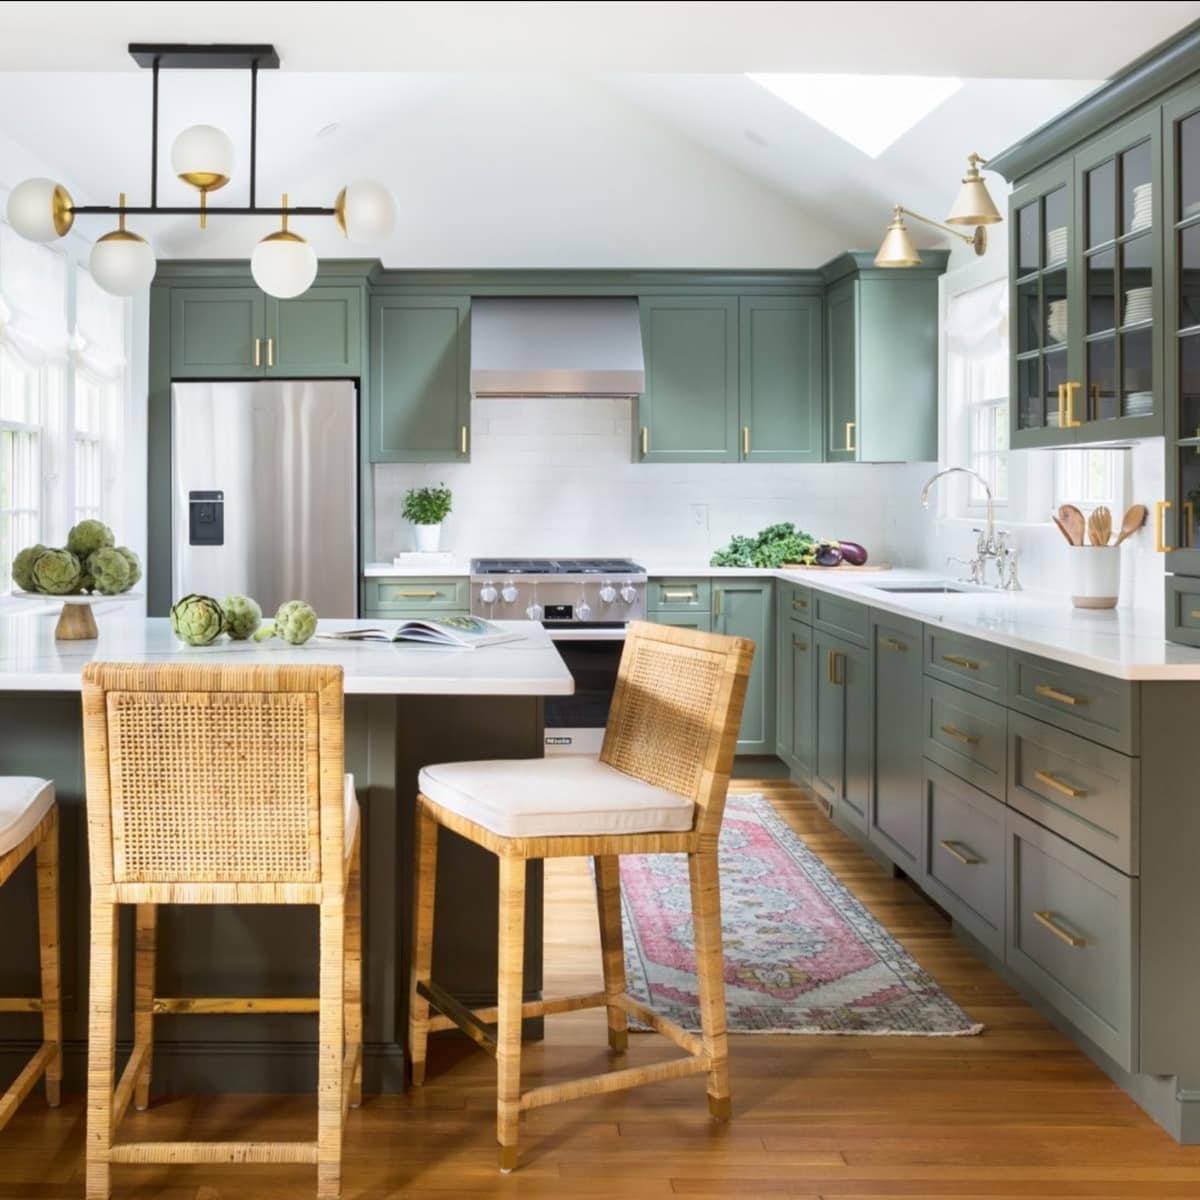 sherwin williams pewter green kitchen cabinets